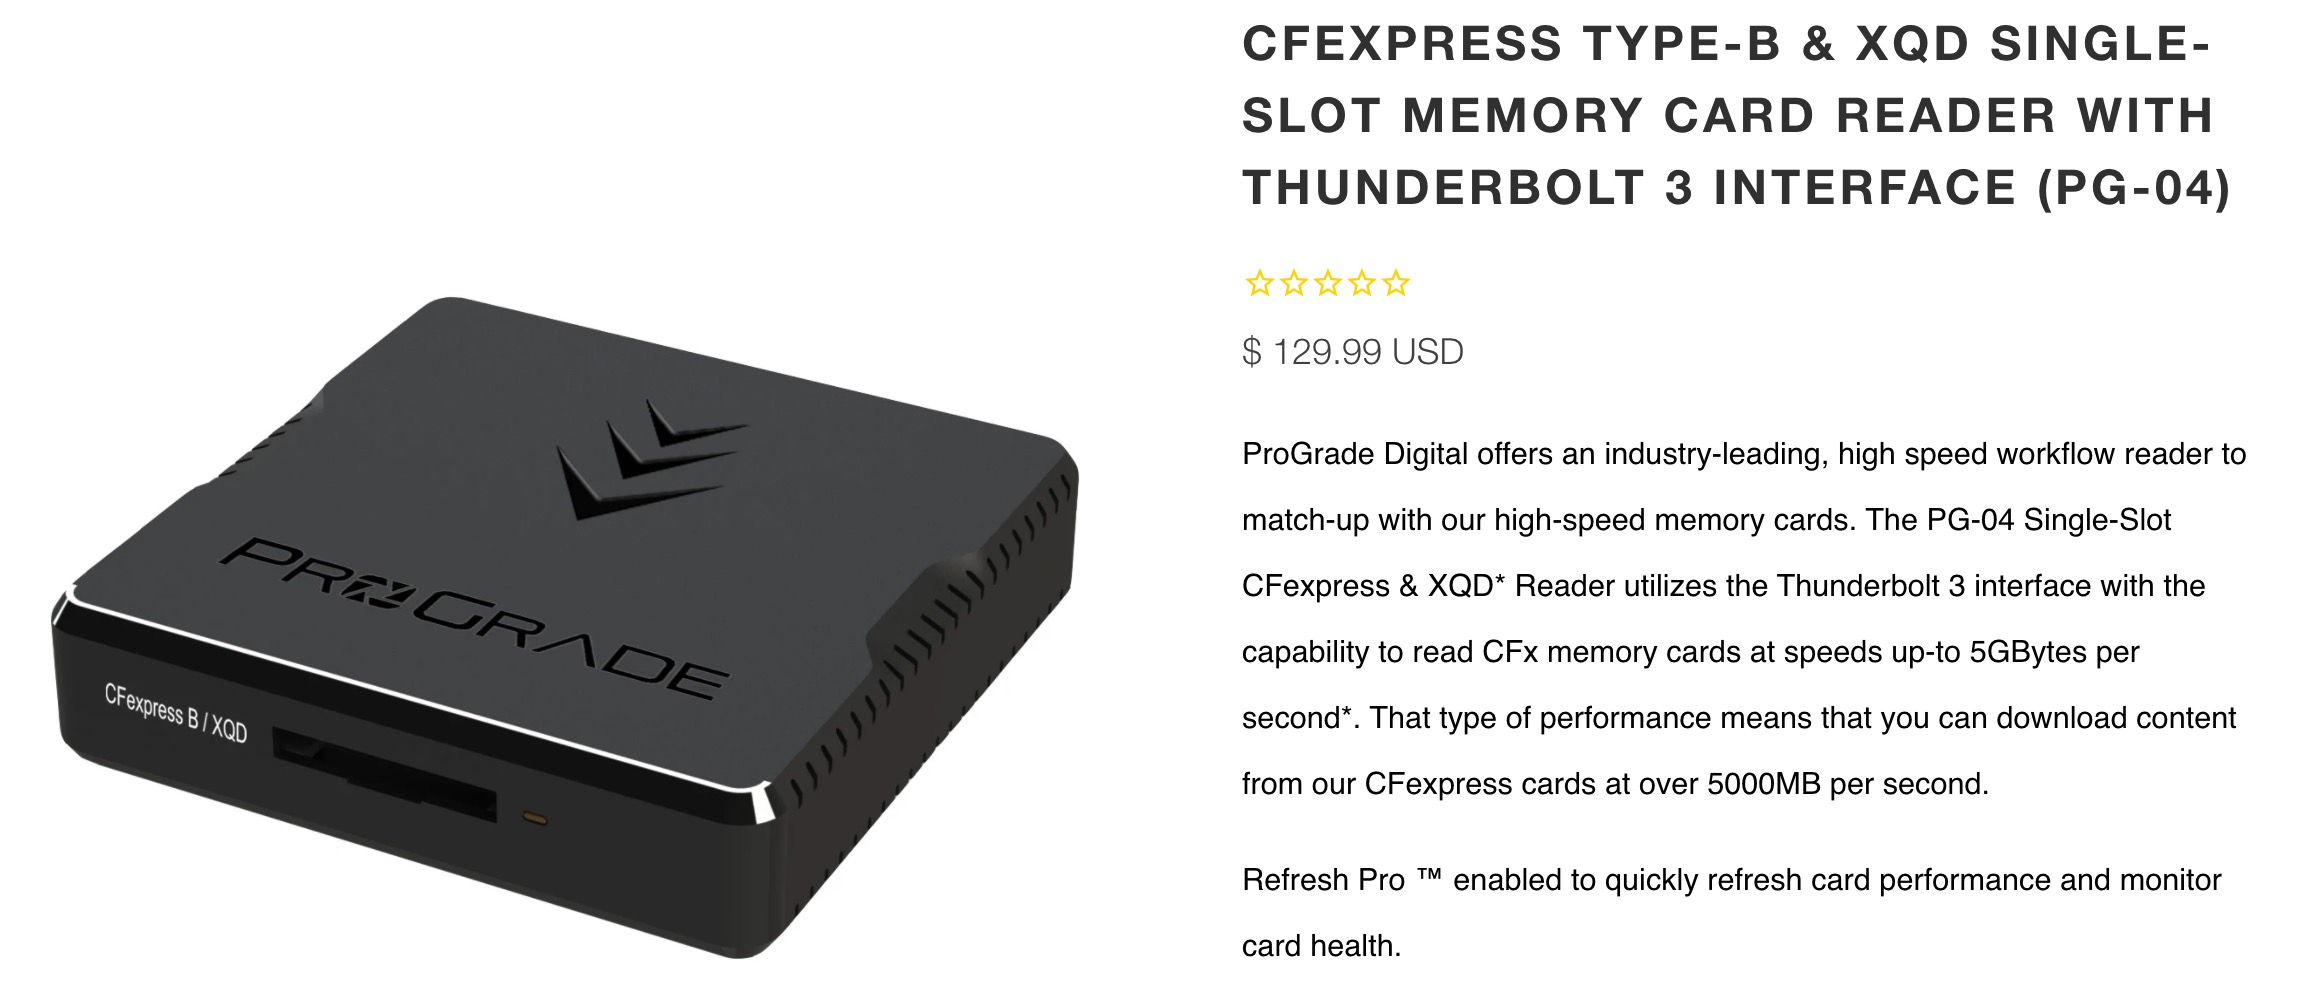 CFexpress Type-B & XQD Single-Slot Memory Card Reader with Thunderbolt 3 Interface (PG-04)